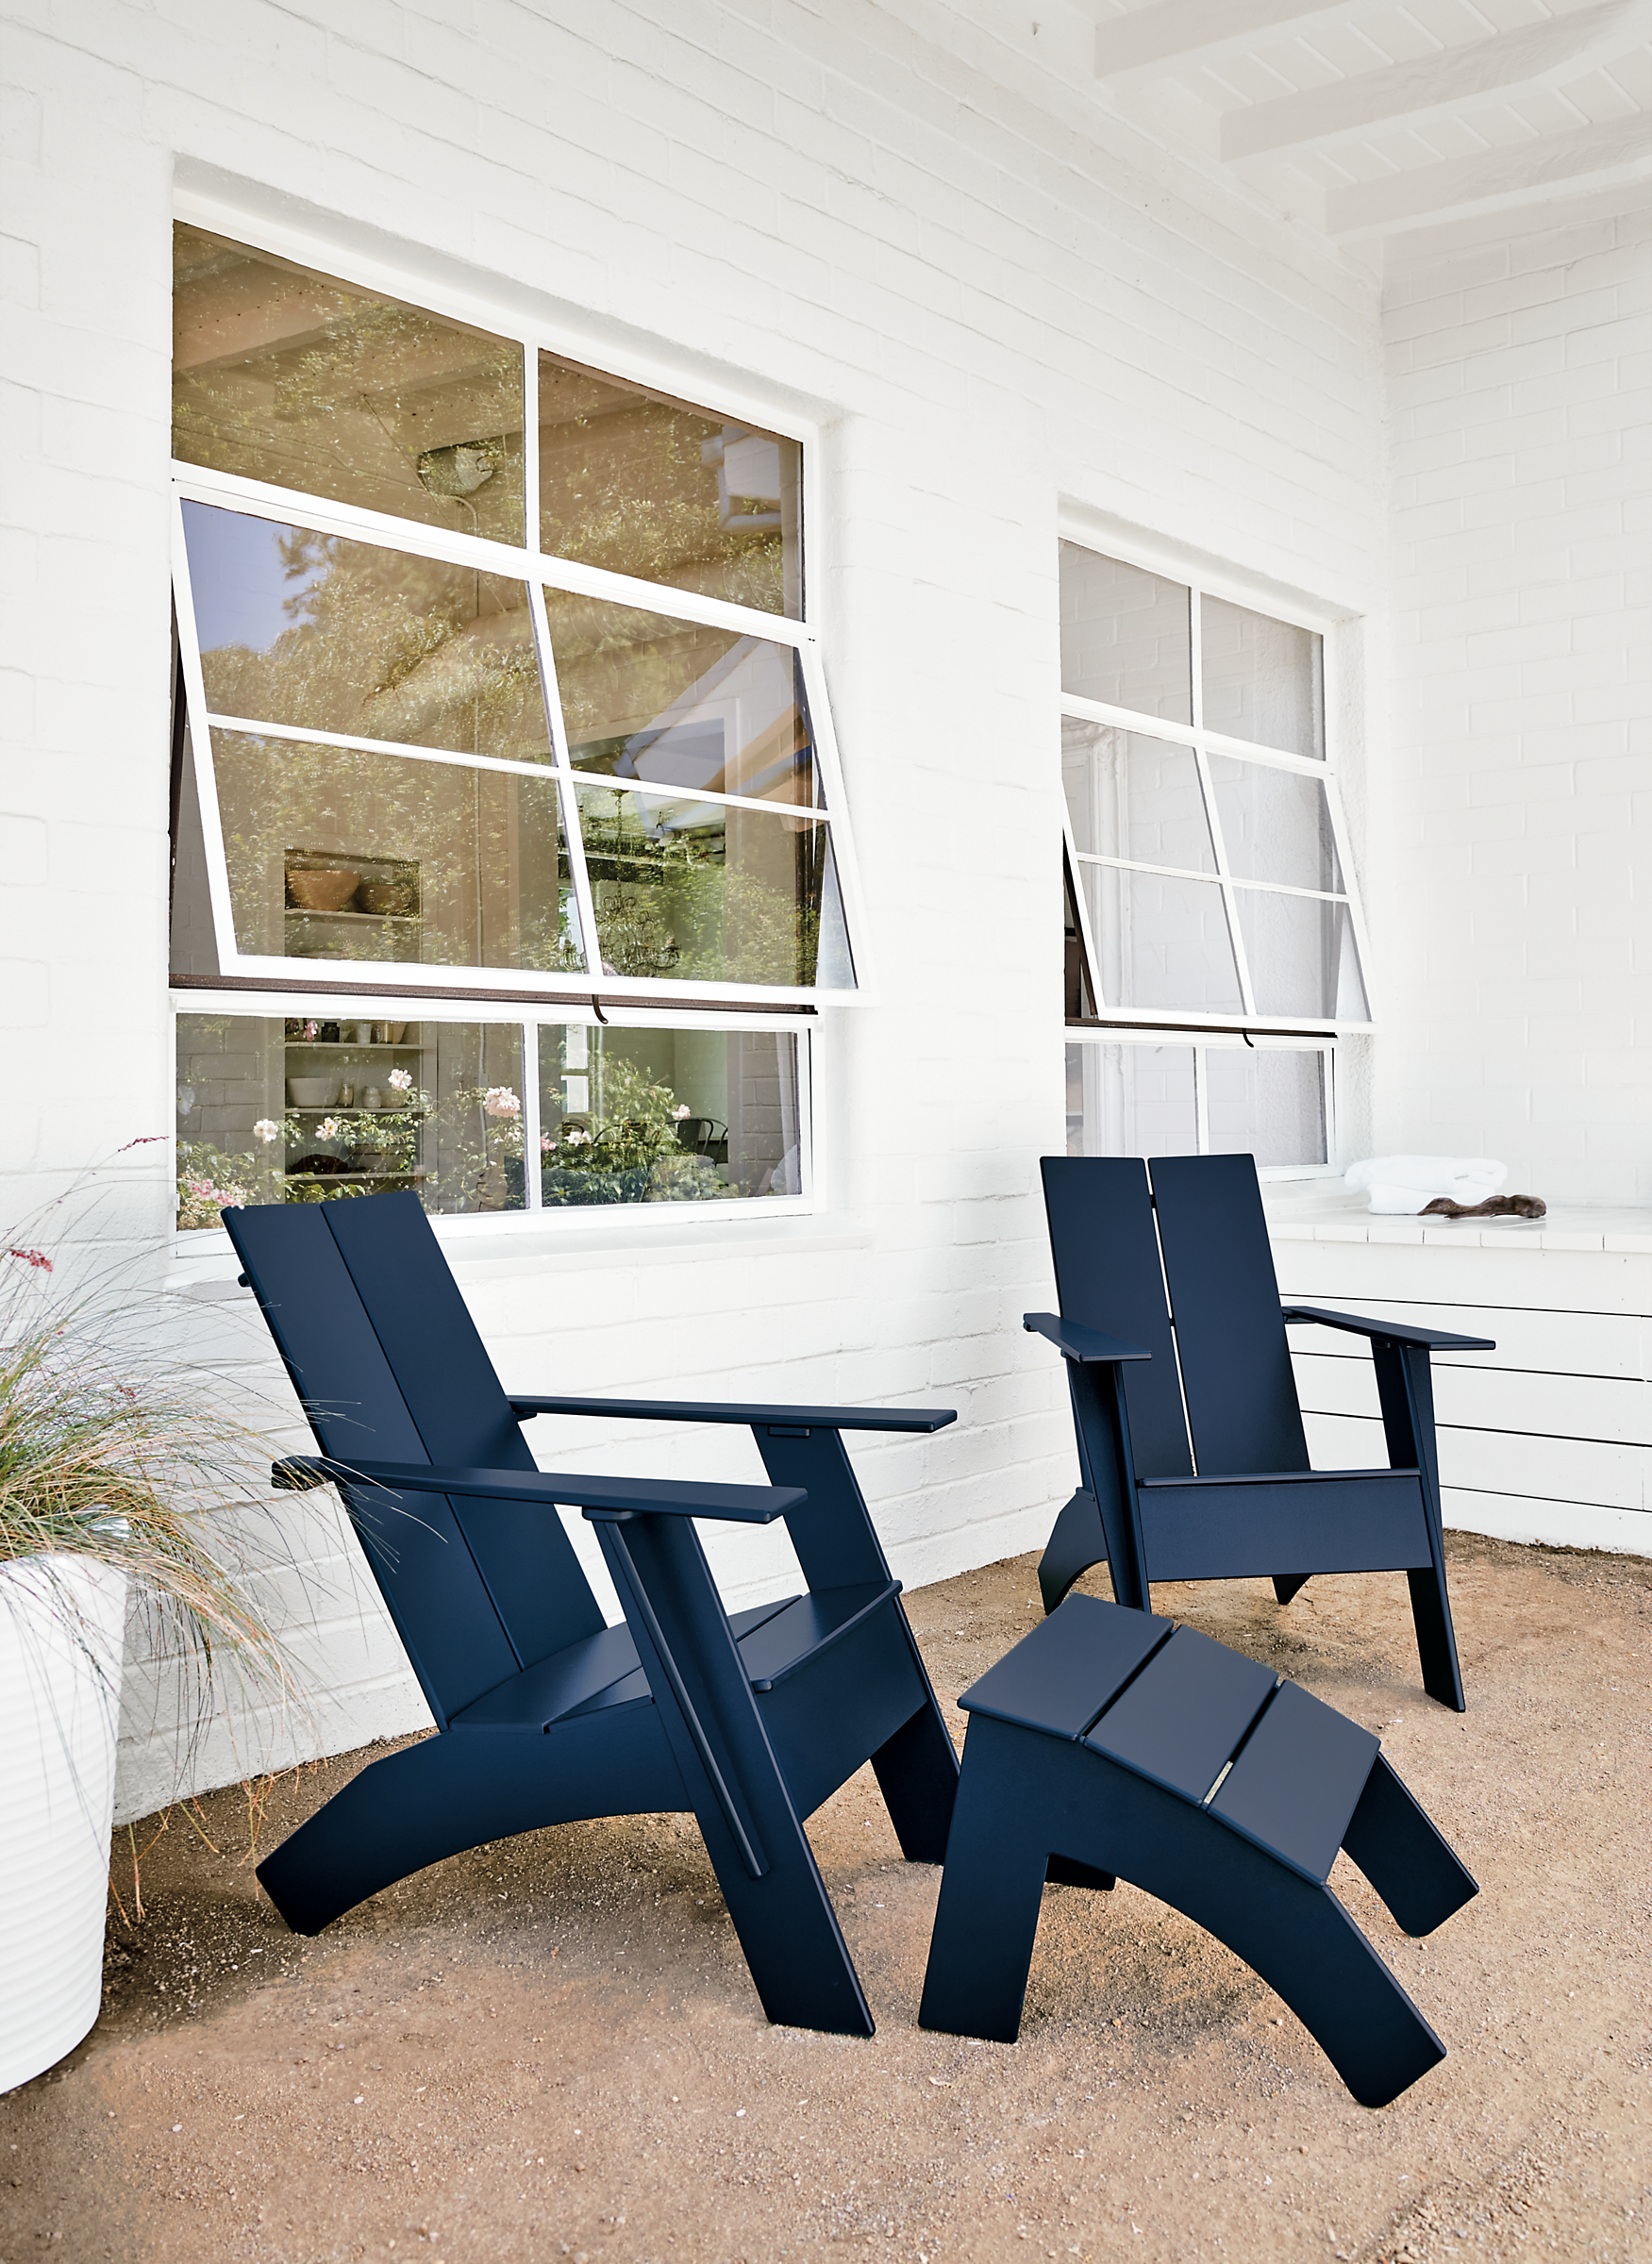 Patio with Emmet tall lounge chair in navy.